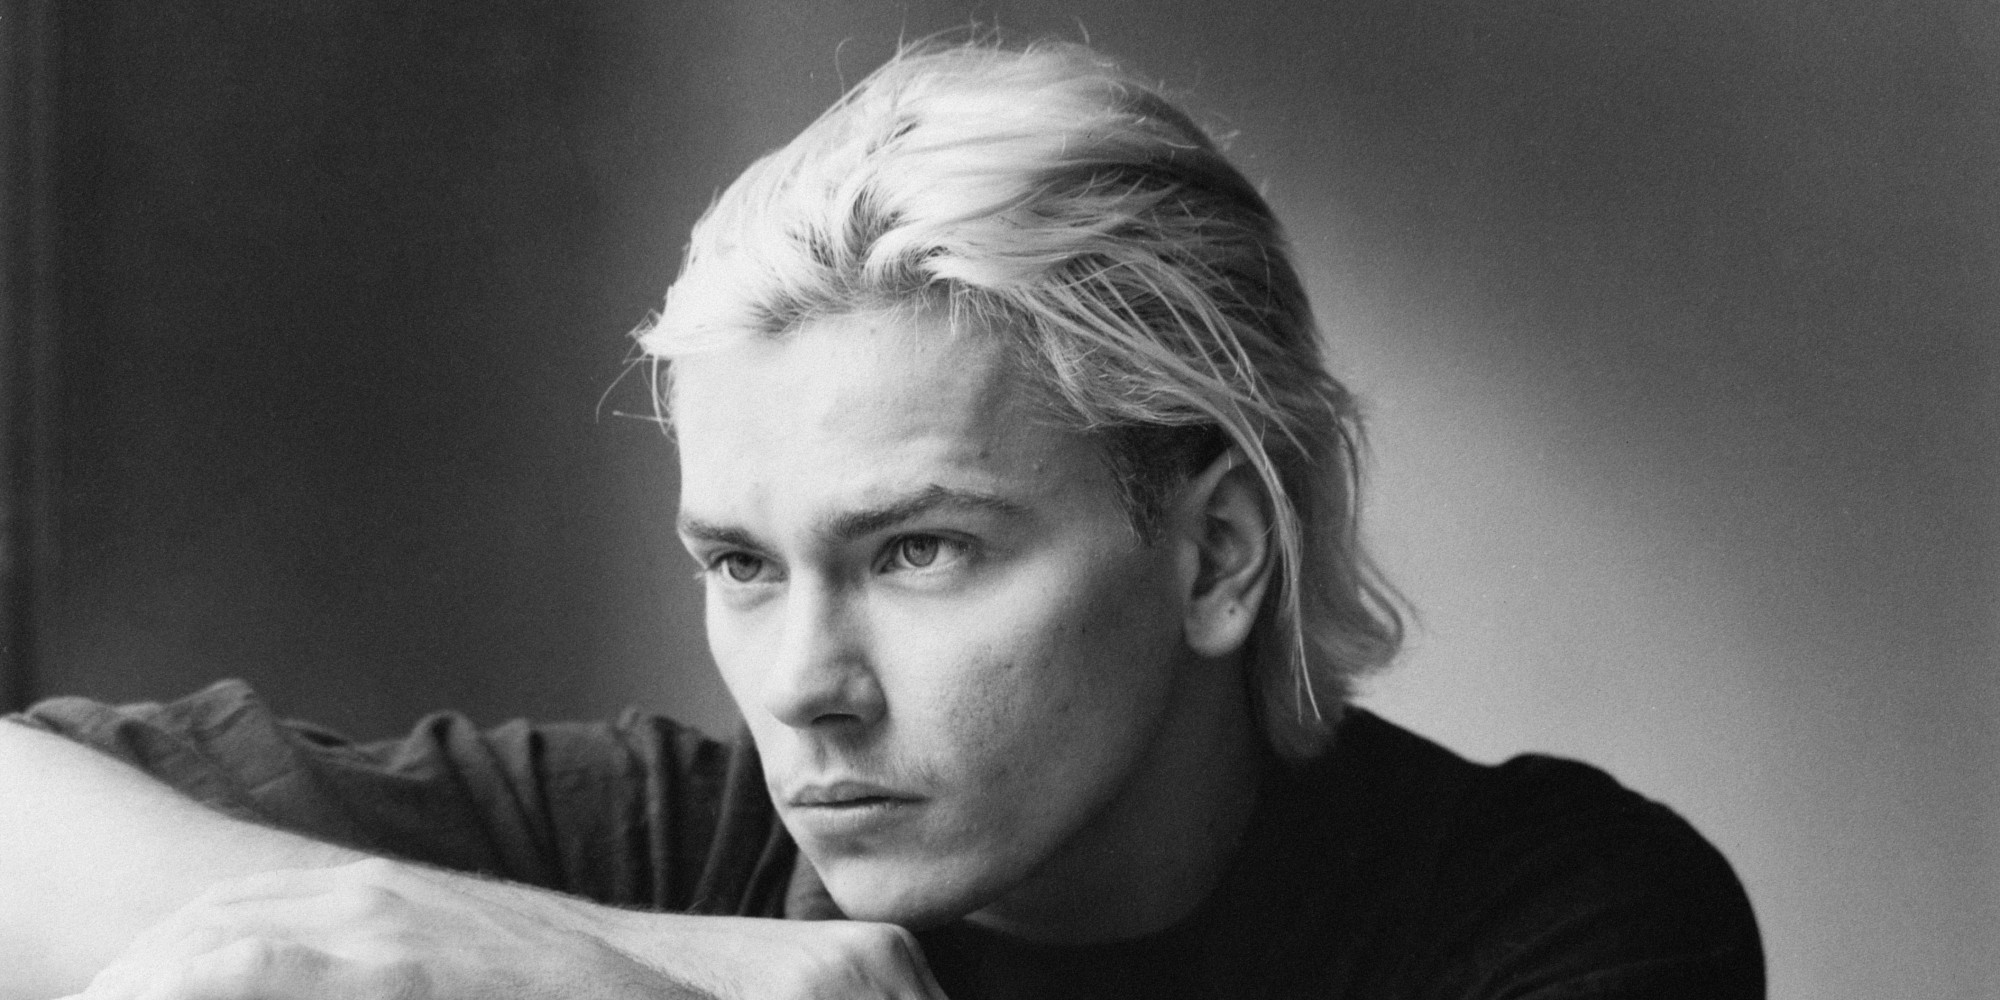 Remembering River Phoenix On The 20th Anniversary Of His Death